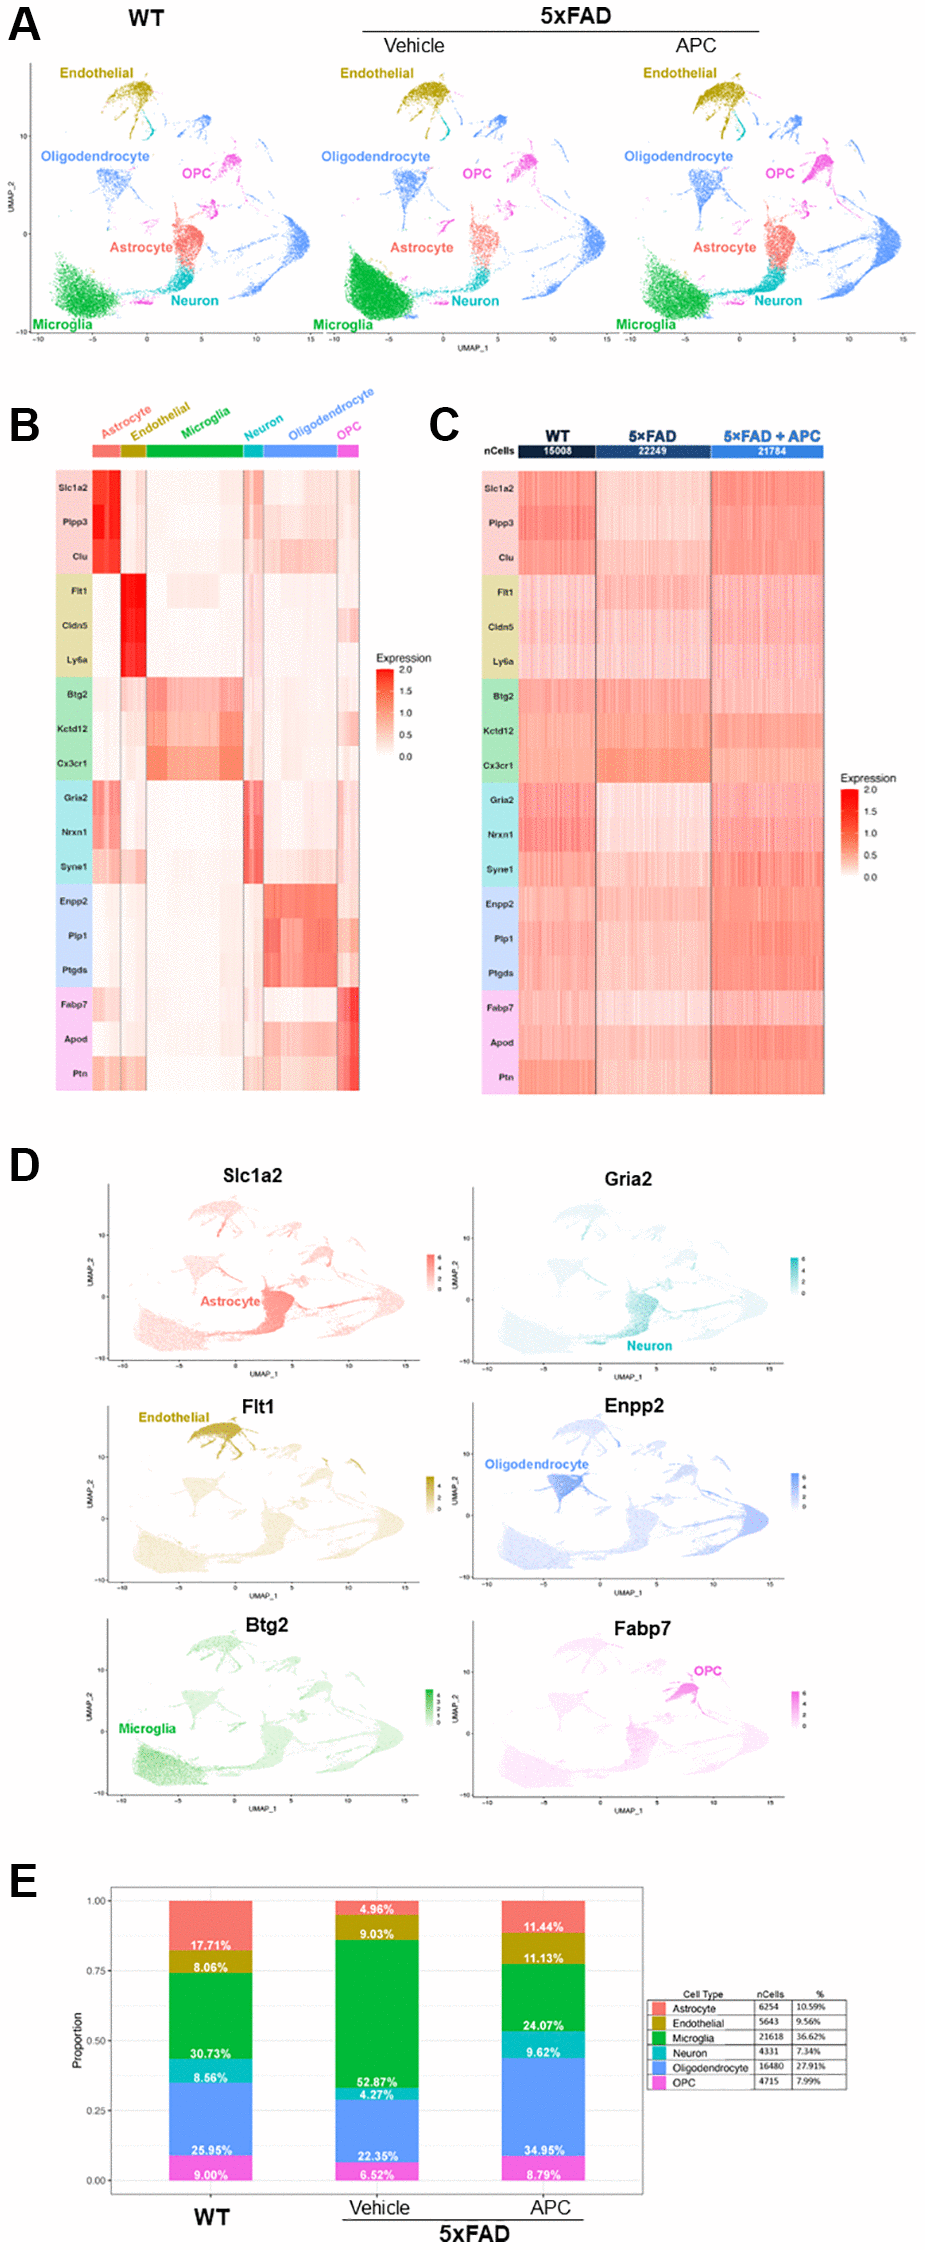 (A) Uniform Manifold Approximation and Projection (UMAP) dimensional plot of the primary integrated dataset split by sample; list of unsupervised clusters colored by cell-type annotated. Wildtype (left), 5xFAD (center), 5xFAD + APC (right). (B) Heatmap of top two conserved marker gene expression in each cluster used for cell-type annotation. Gene color corresponds to cell-type annotation. (C) Heatmap of top two conserved marker gene expression in each dataset used for cell-type annotation. Gene color corresponds to cell-type annotation. Number of cells shown per sample. (D) Feature plot of top marker genes, coloring cells by expression of the top marker gene for each cell-type annotated. (E) Proportion and percentage of each cell-type observed in each individual sample as well as the overall integrated dataset.